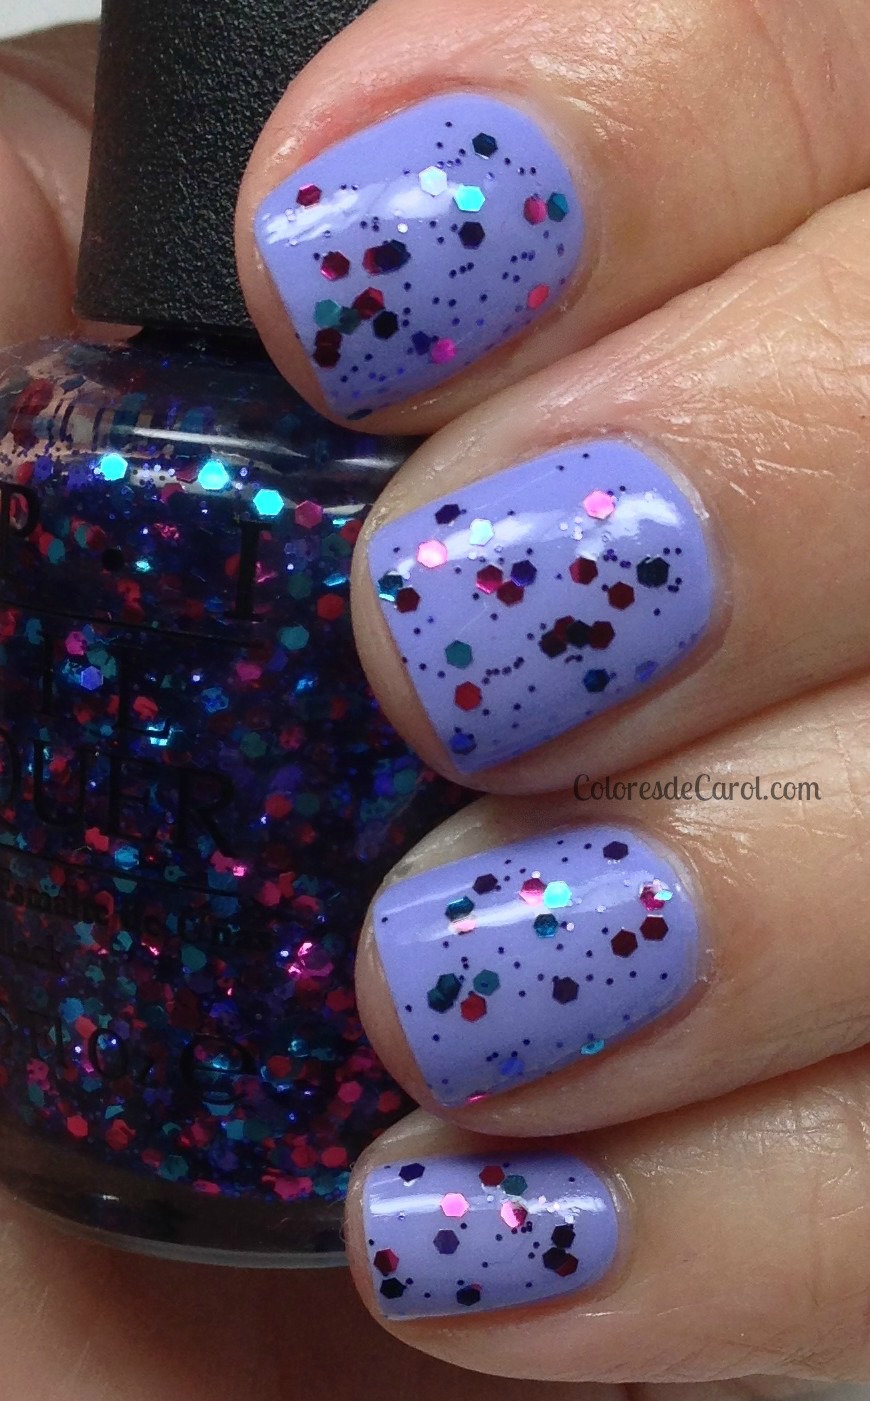 Colores de Carol: OPI Euro Centrale Collection, swatches and Review.